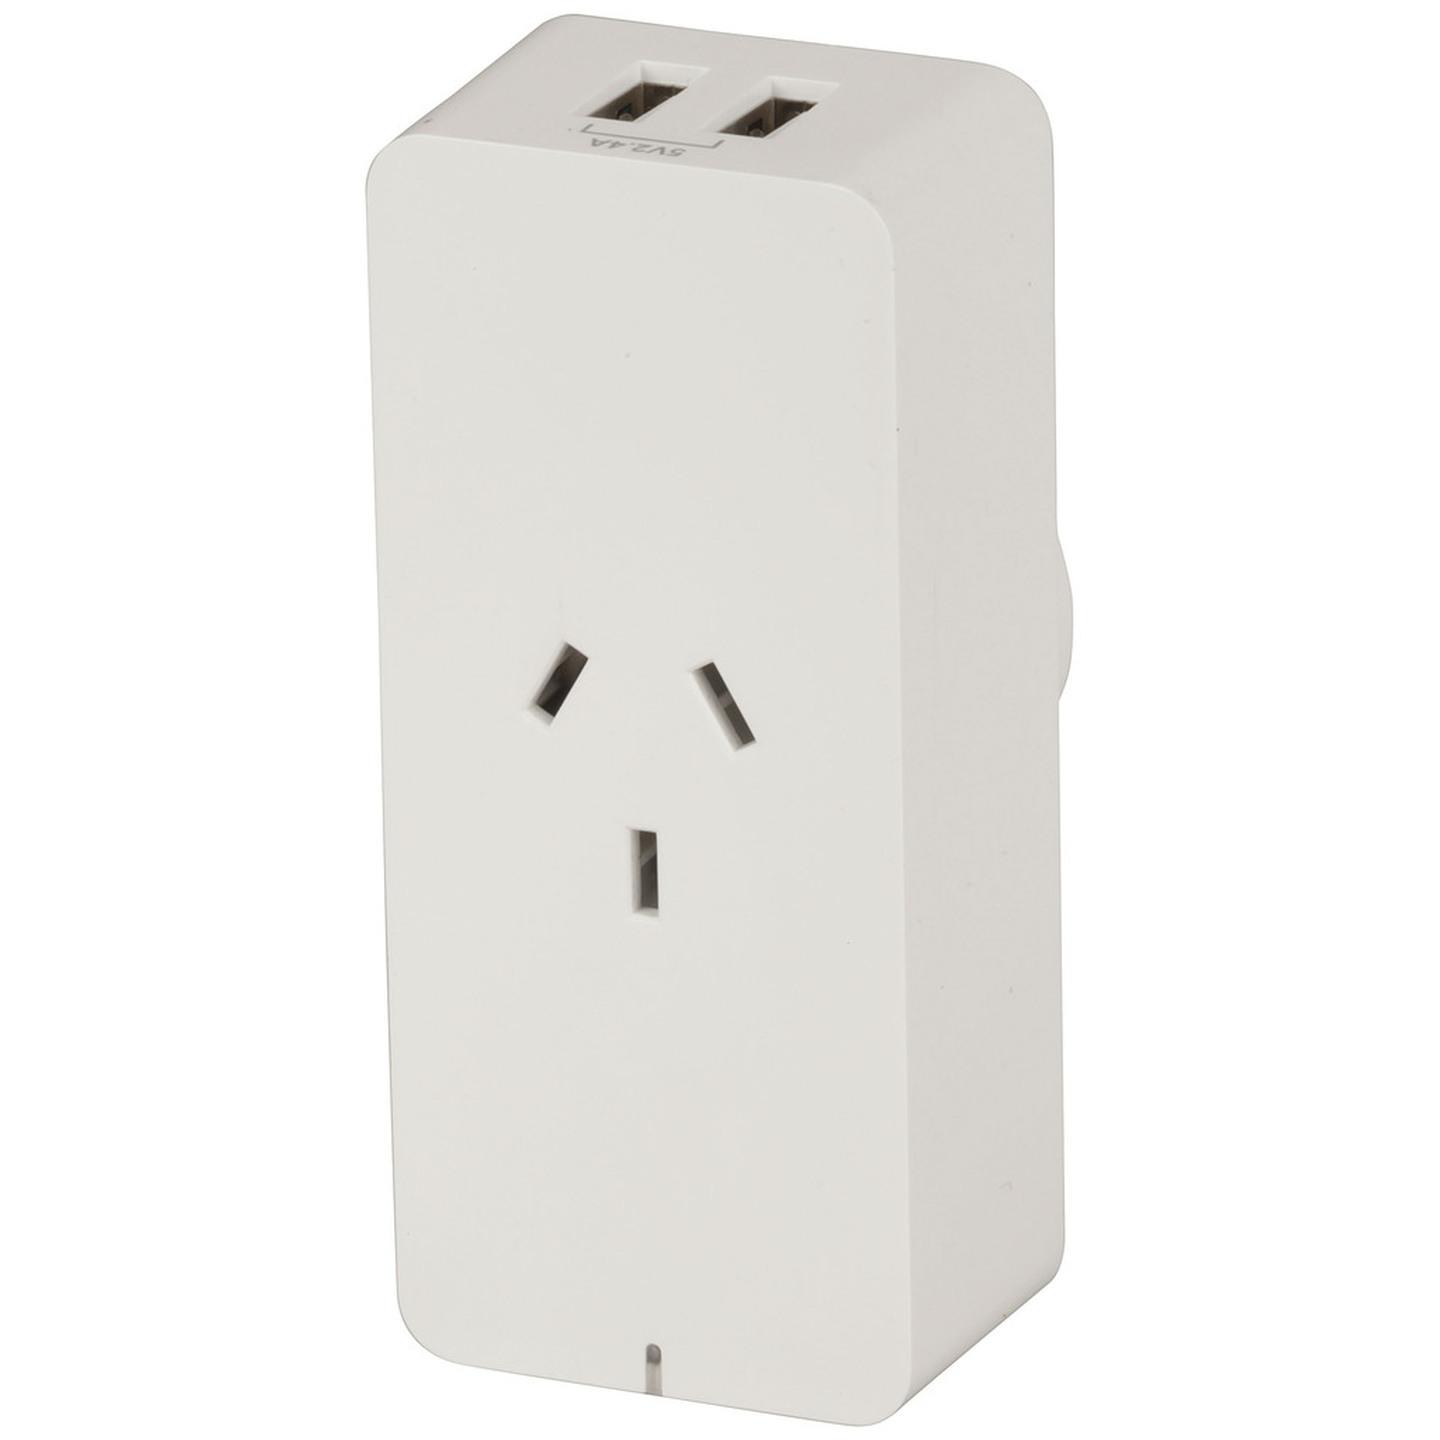 Smart Plug WiFi Controlled Main Switch and Energy Monitor with 2 x USB Sockets